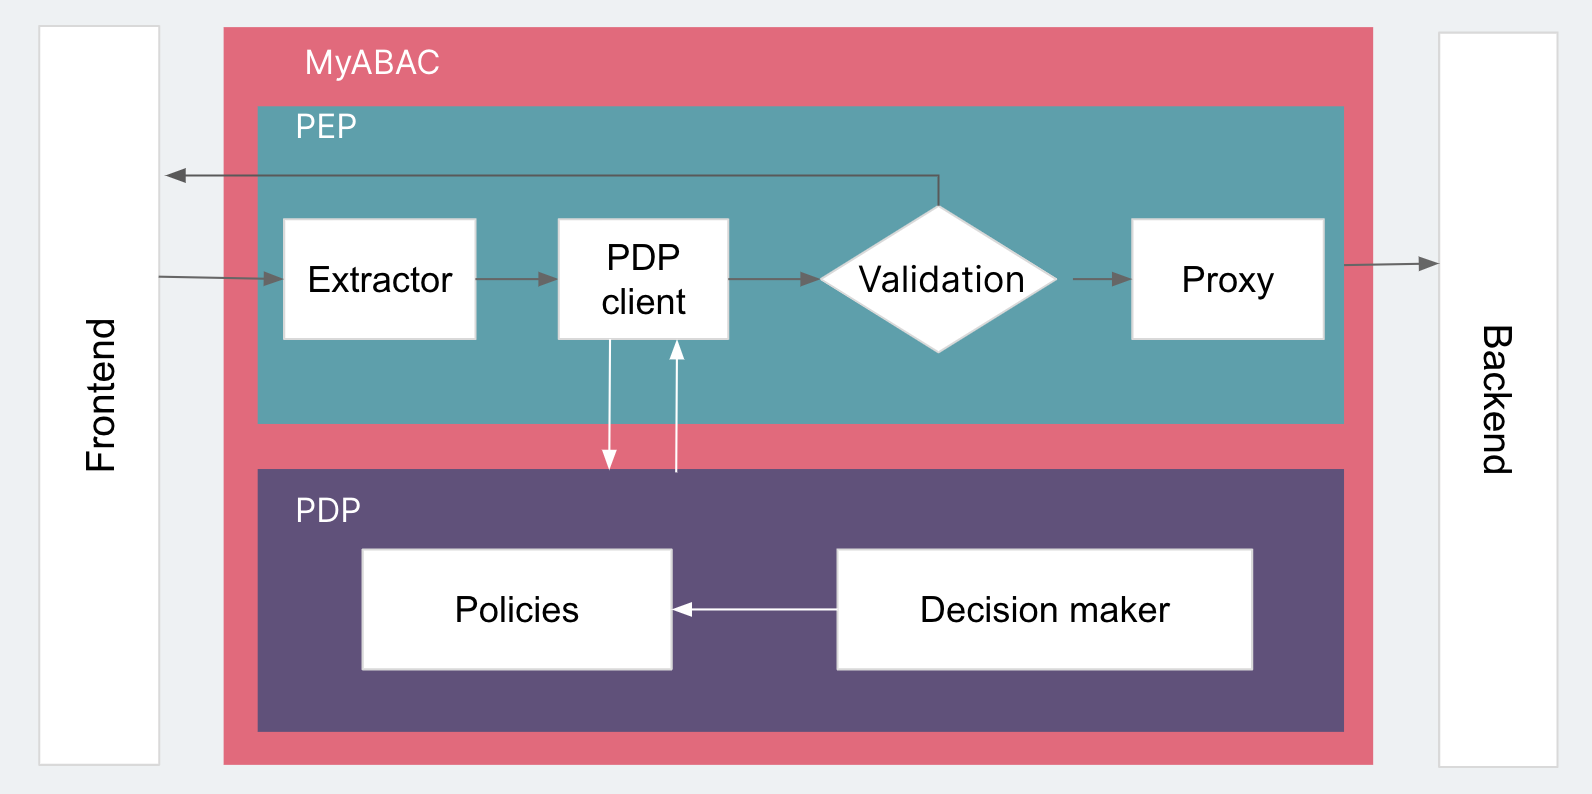 A diagram showing the architecture of MyABAC for Iteration 2 (PEP + PDP)